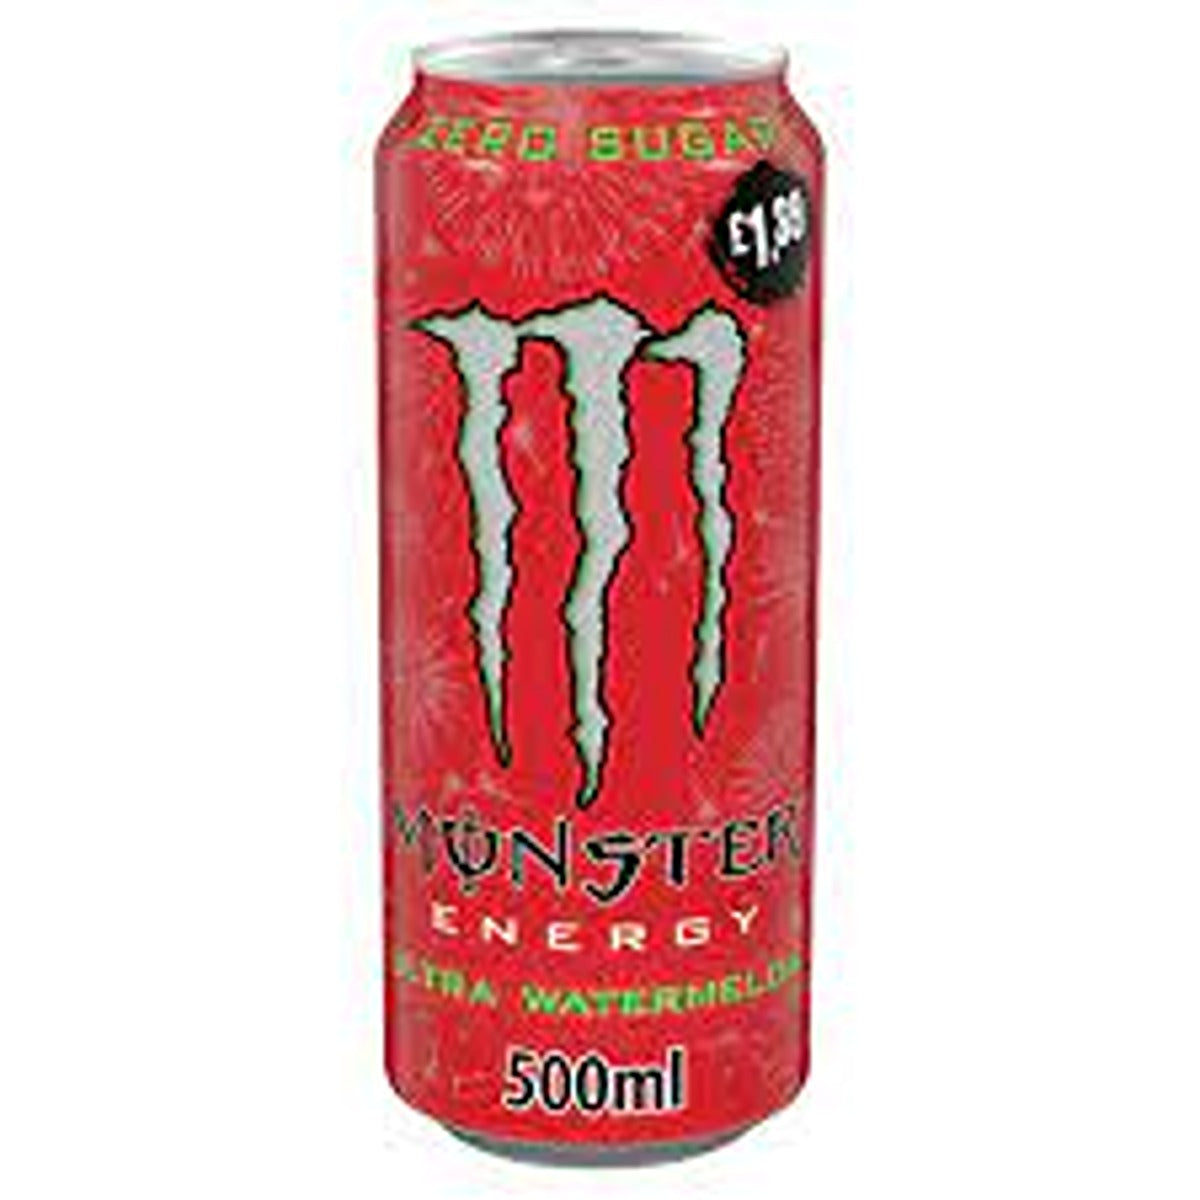 Monster Energy - Ultra Watermelon Energy Drink - 500ml - Continental Food Store